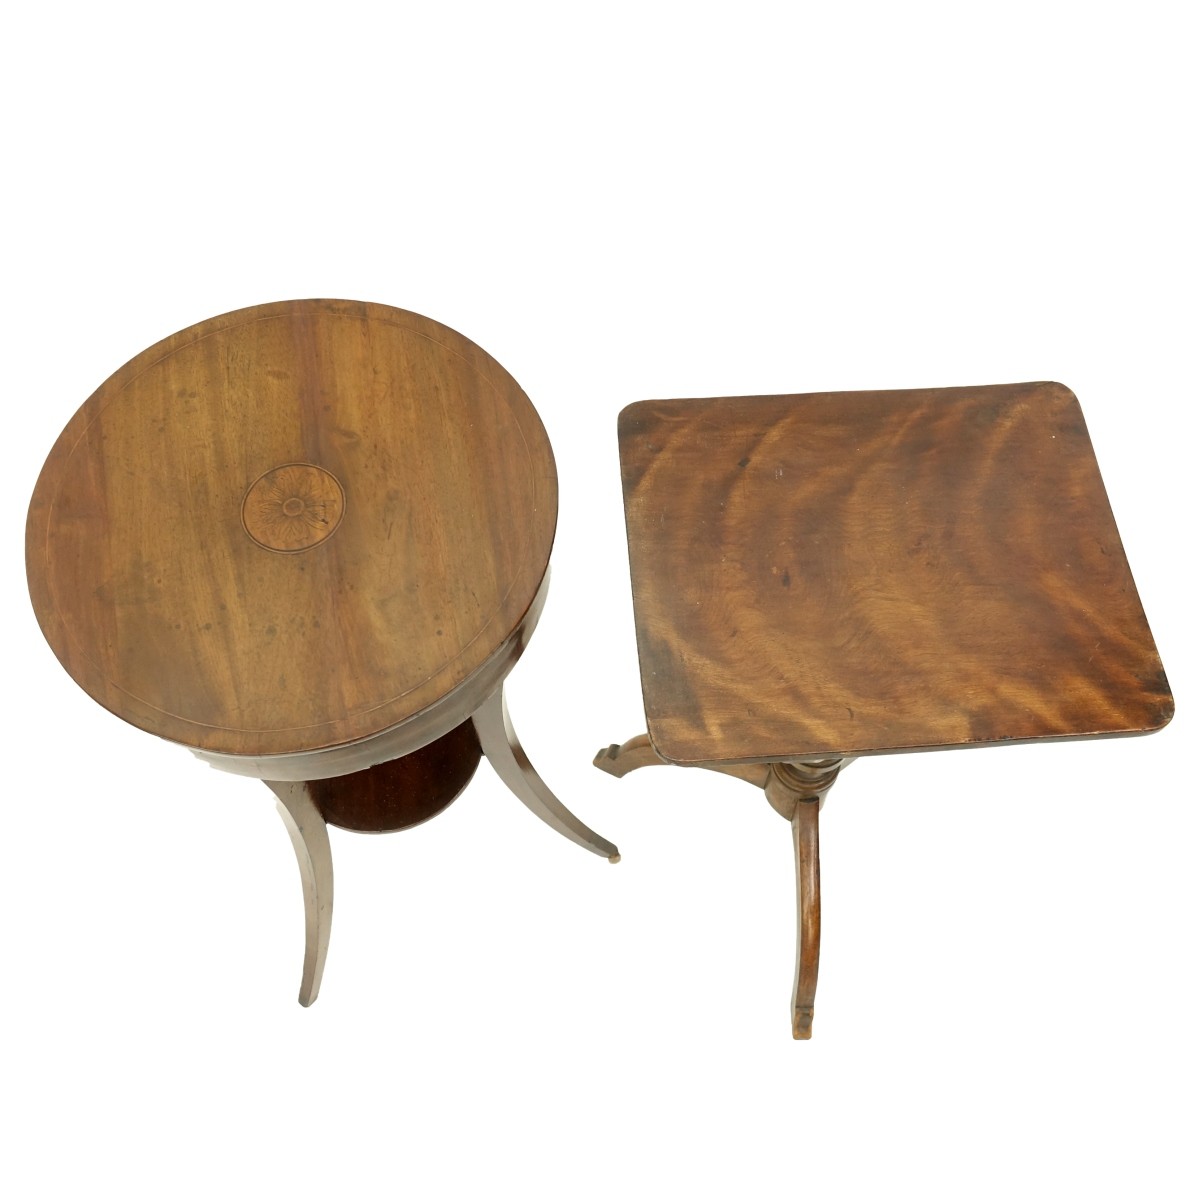 Two Antique Mahogany Tables